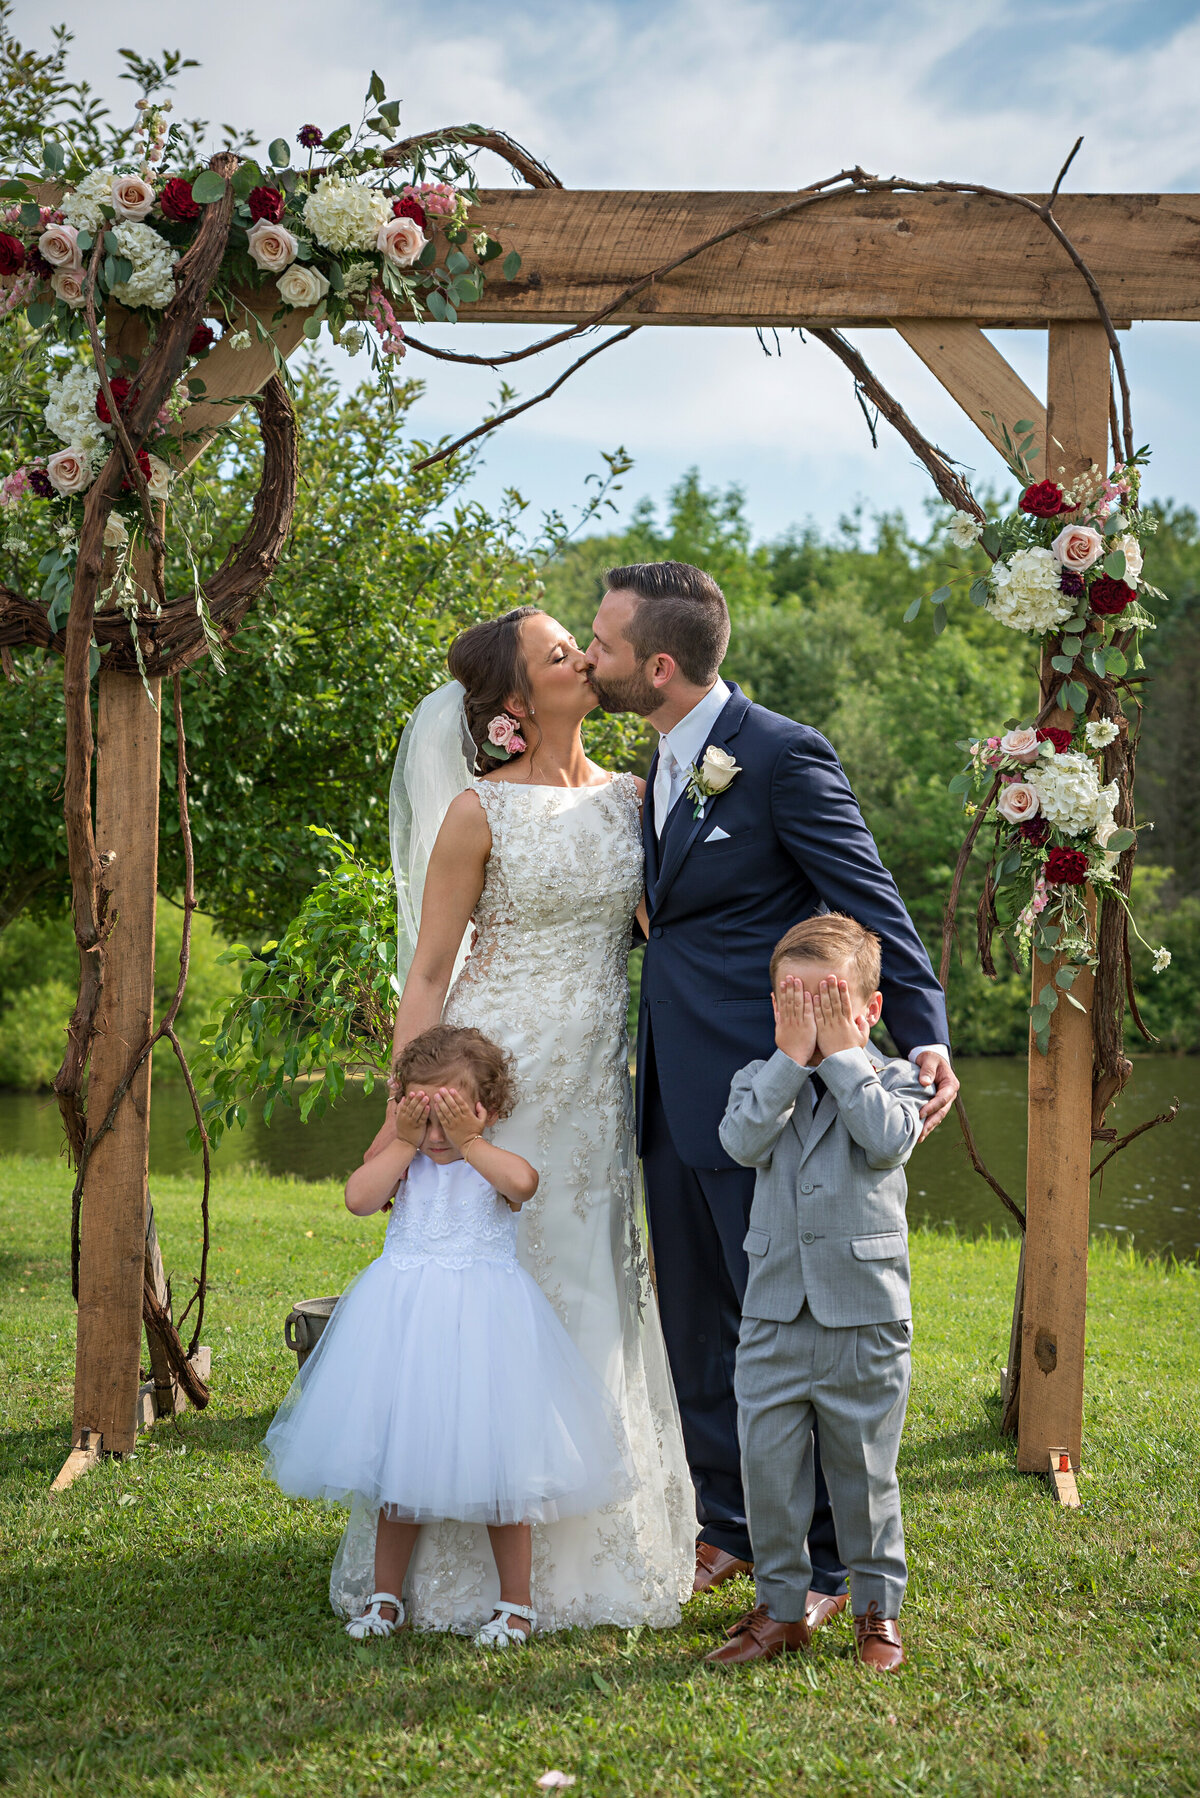 Bride and groom kiss while ring bearer and flower girl cover eyes.